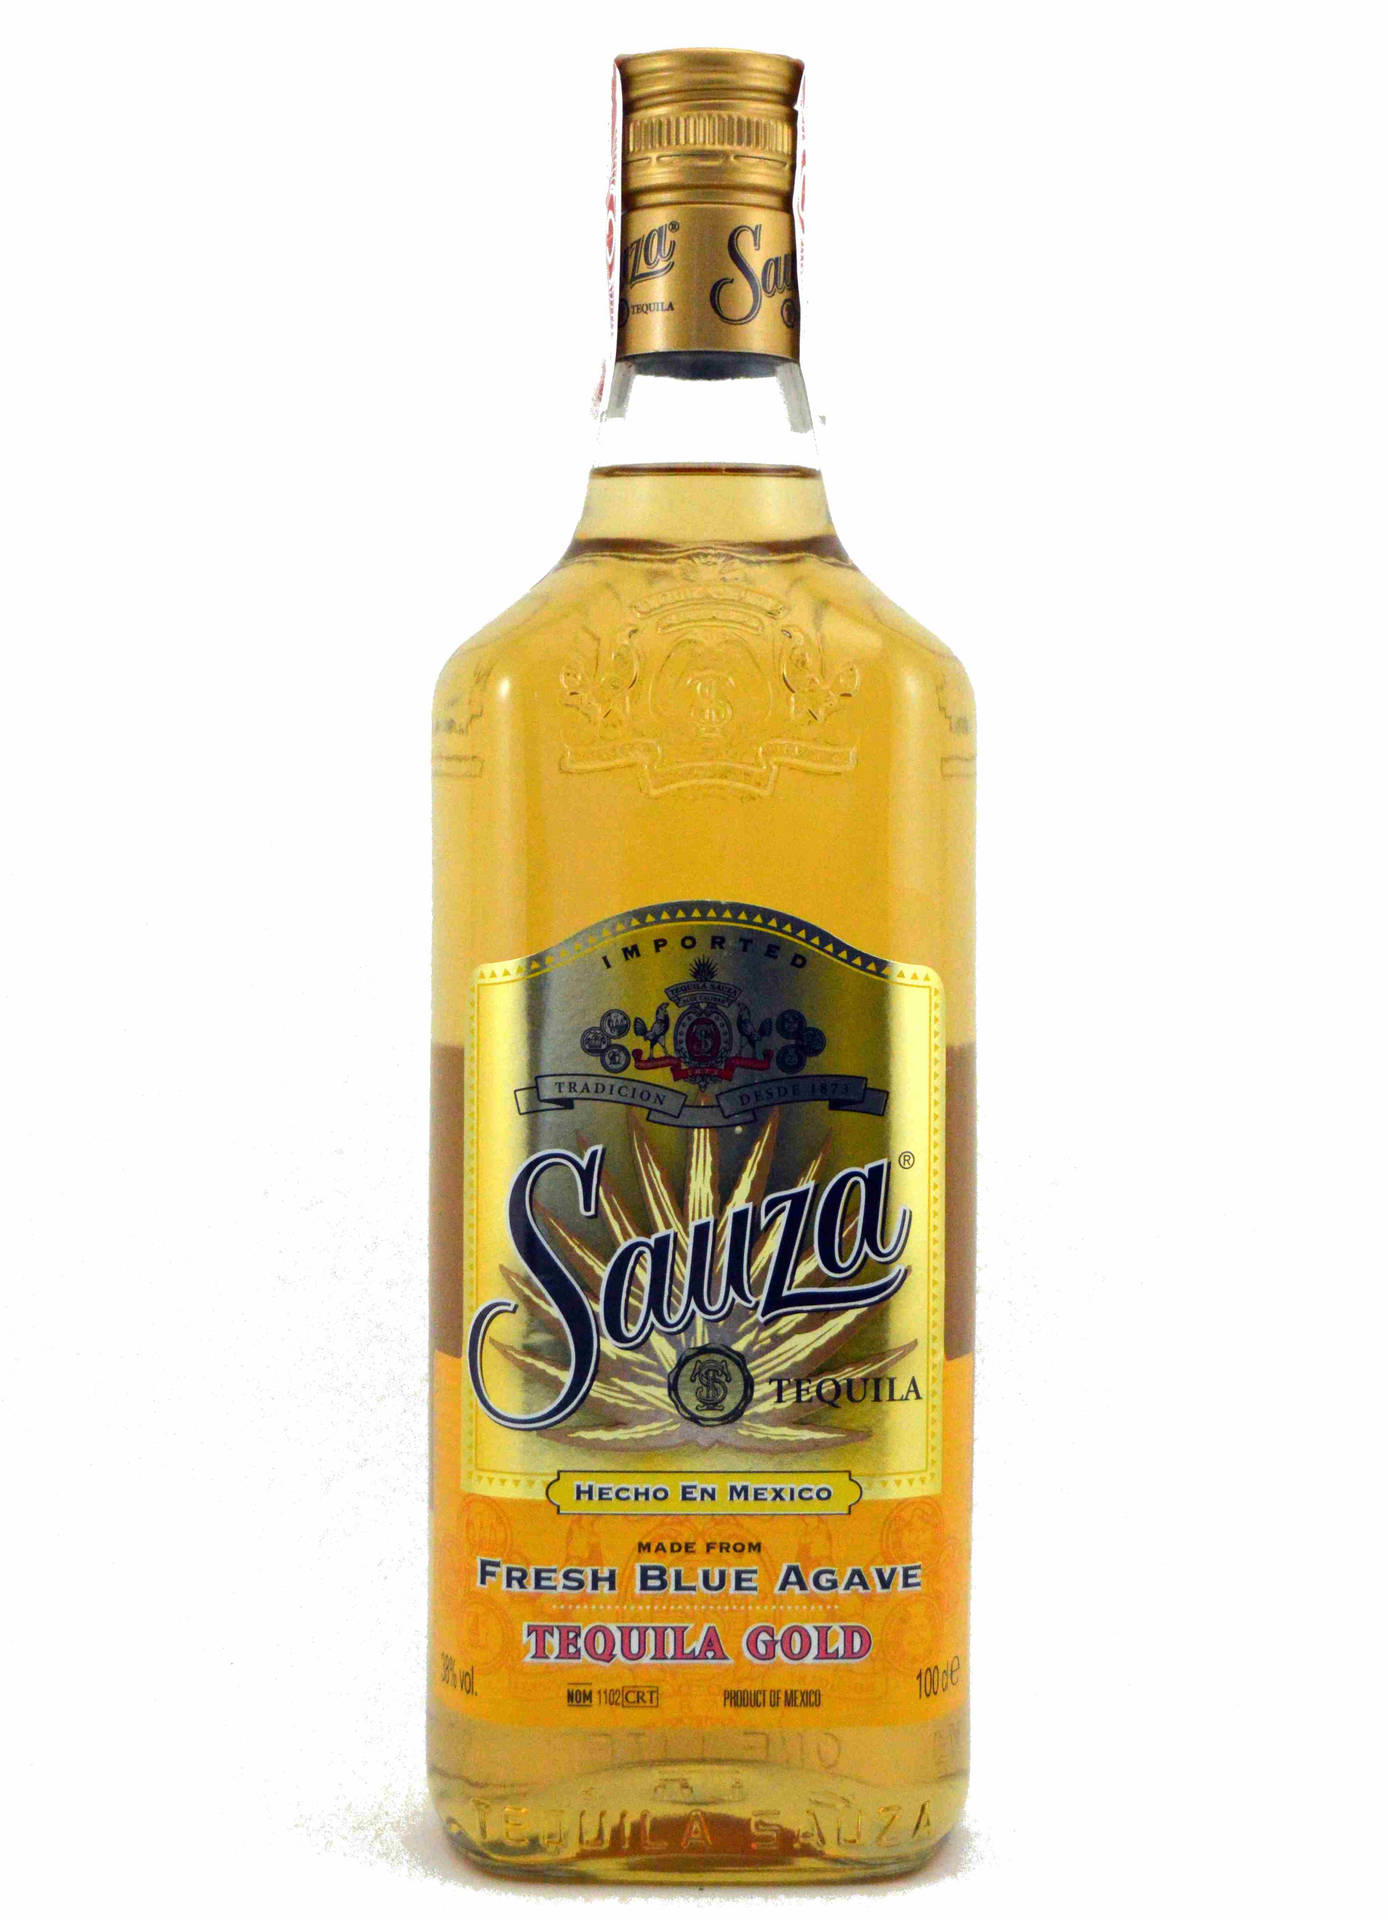 Sauzagold 1 Liter Would Not Make Sense In The Context Of Computer Or Mobile Wallpaper, As It Is A Type Of Tequila. Can You Please Provide A Different Sentence For Me To Translate? Wallpaper